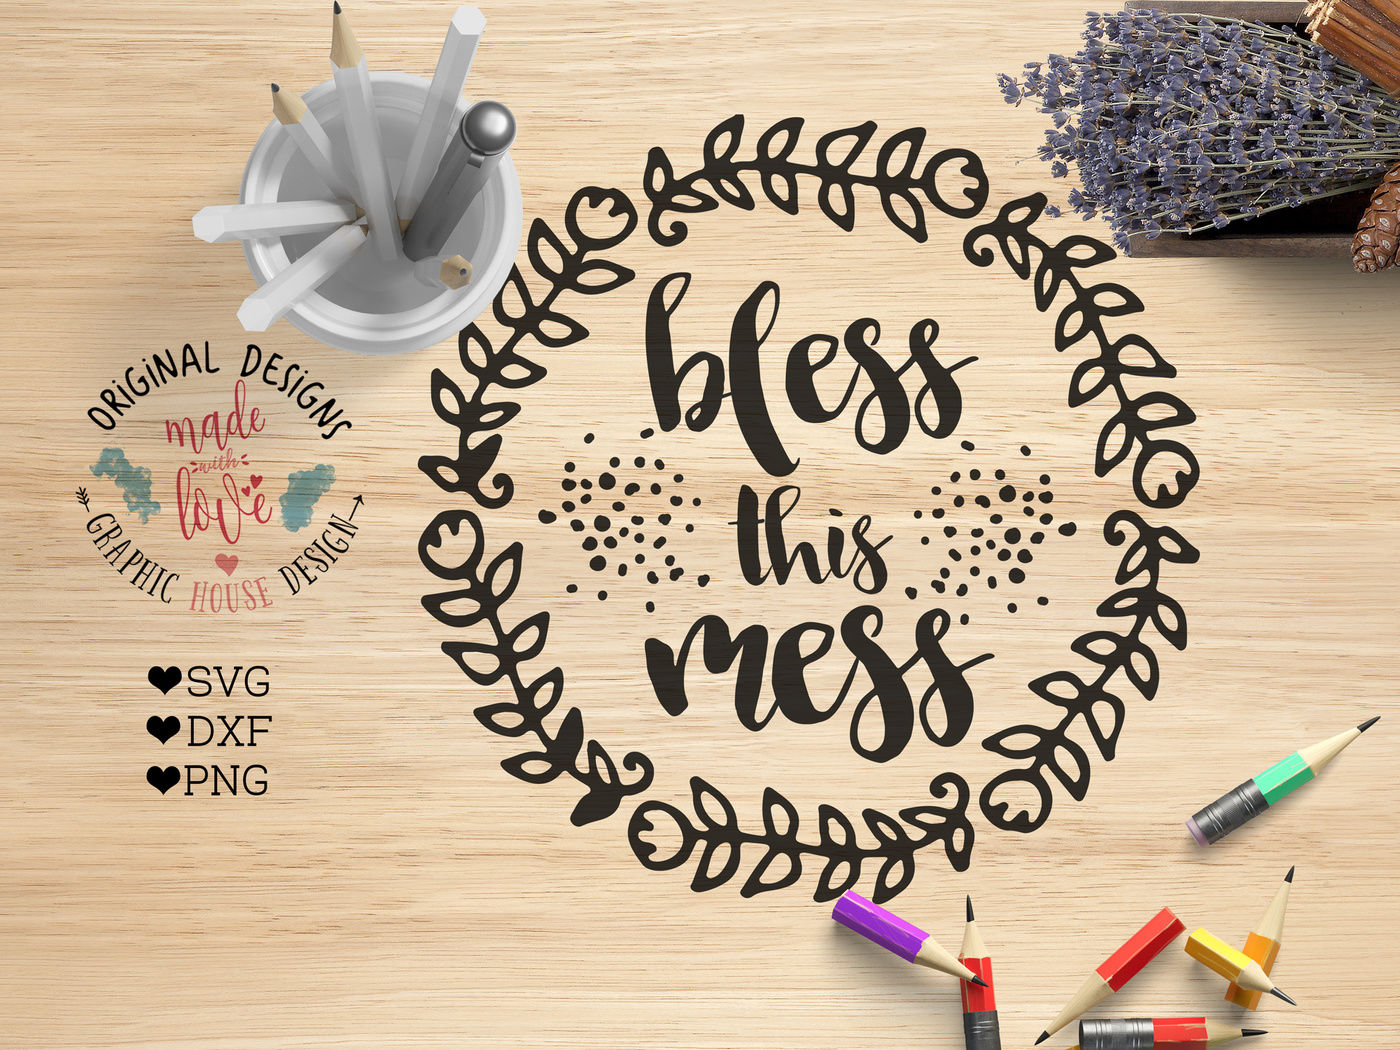 bless-this-mess-svg-dxf-png-cutting-file-by-graphichousedesign